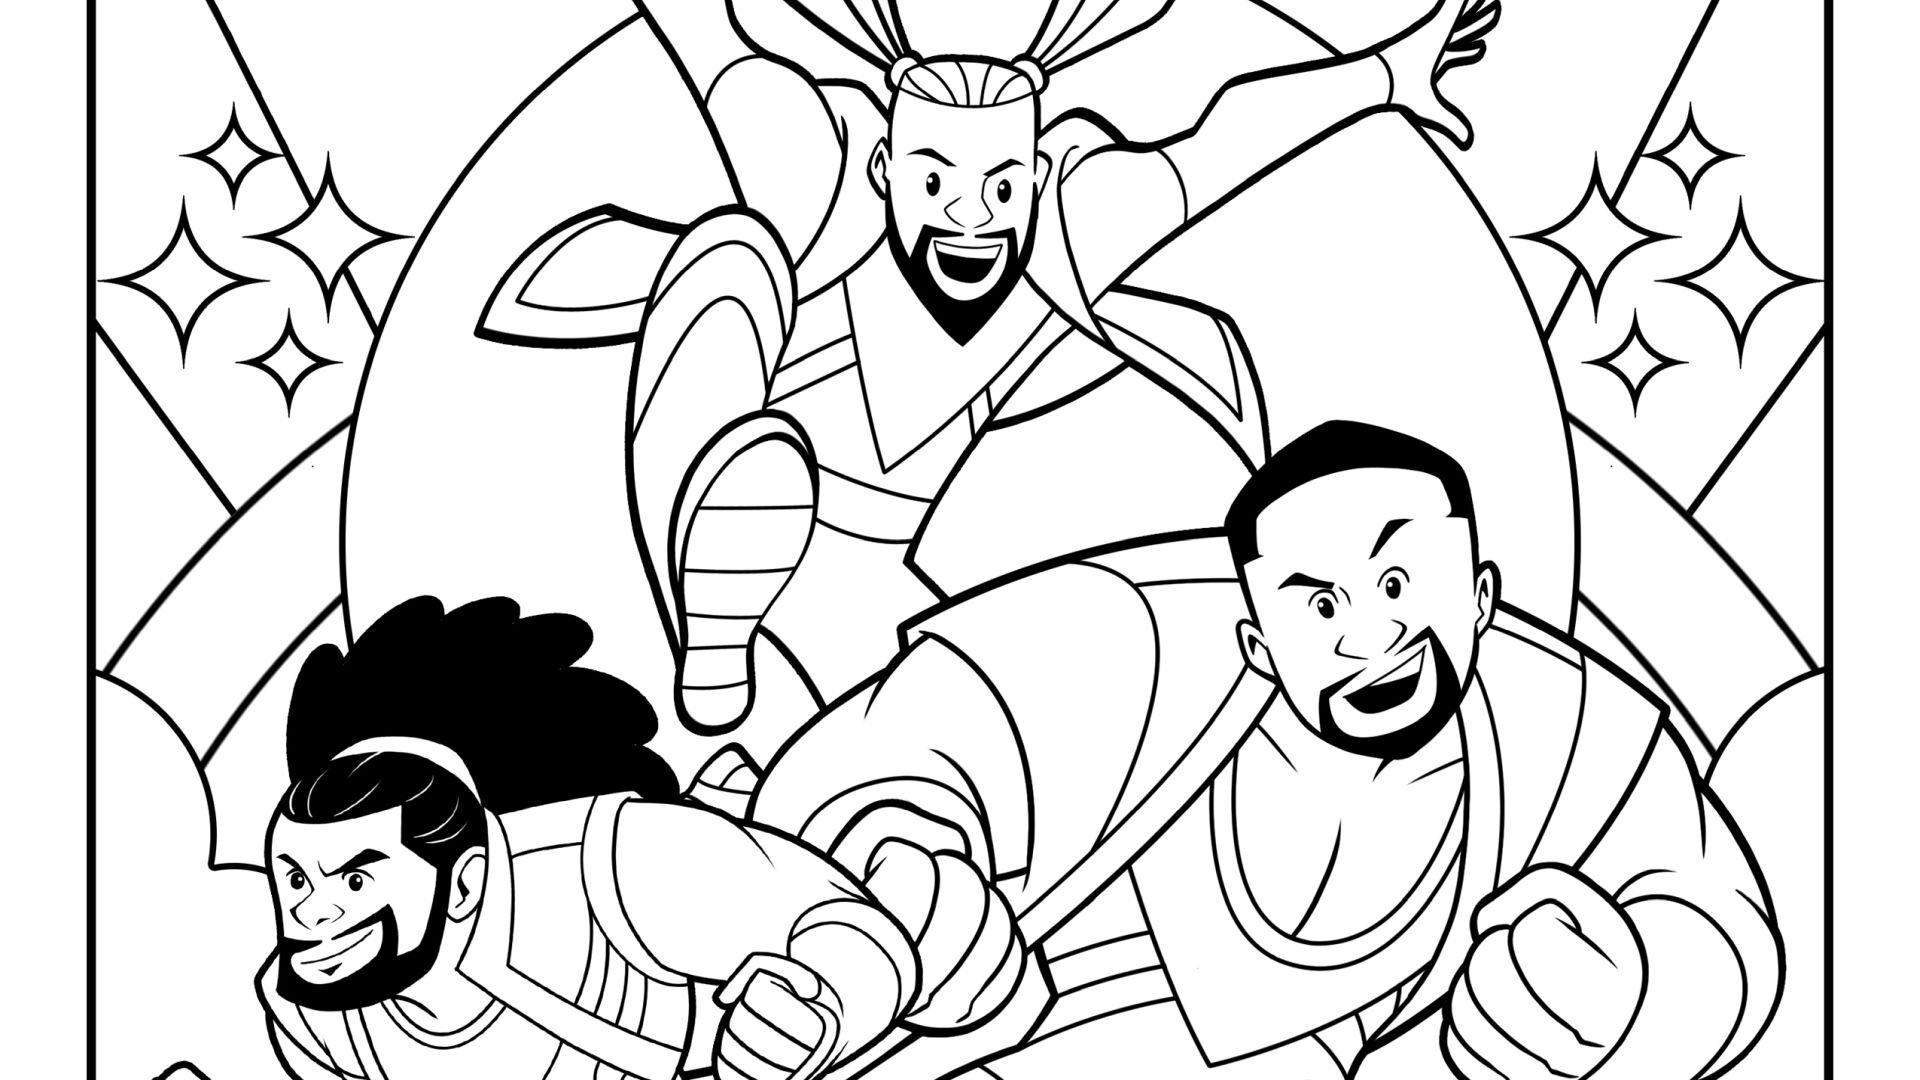 Get Your WWE Fix with These Free The New Day Coloring Pages — GeekTyrant